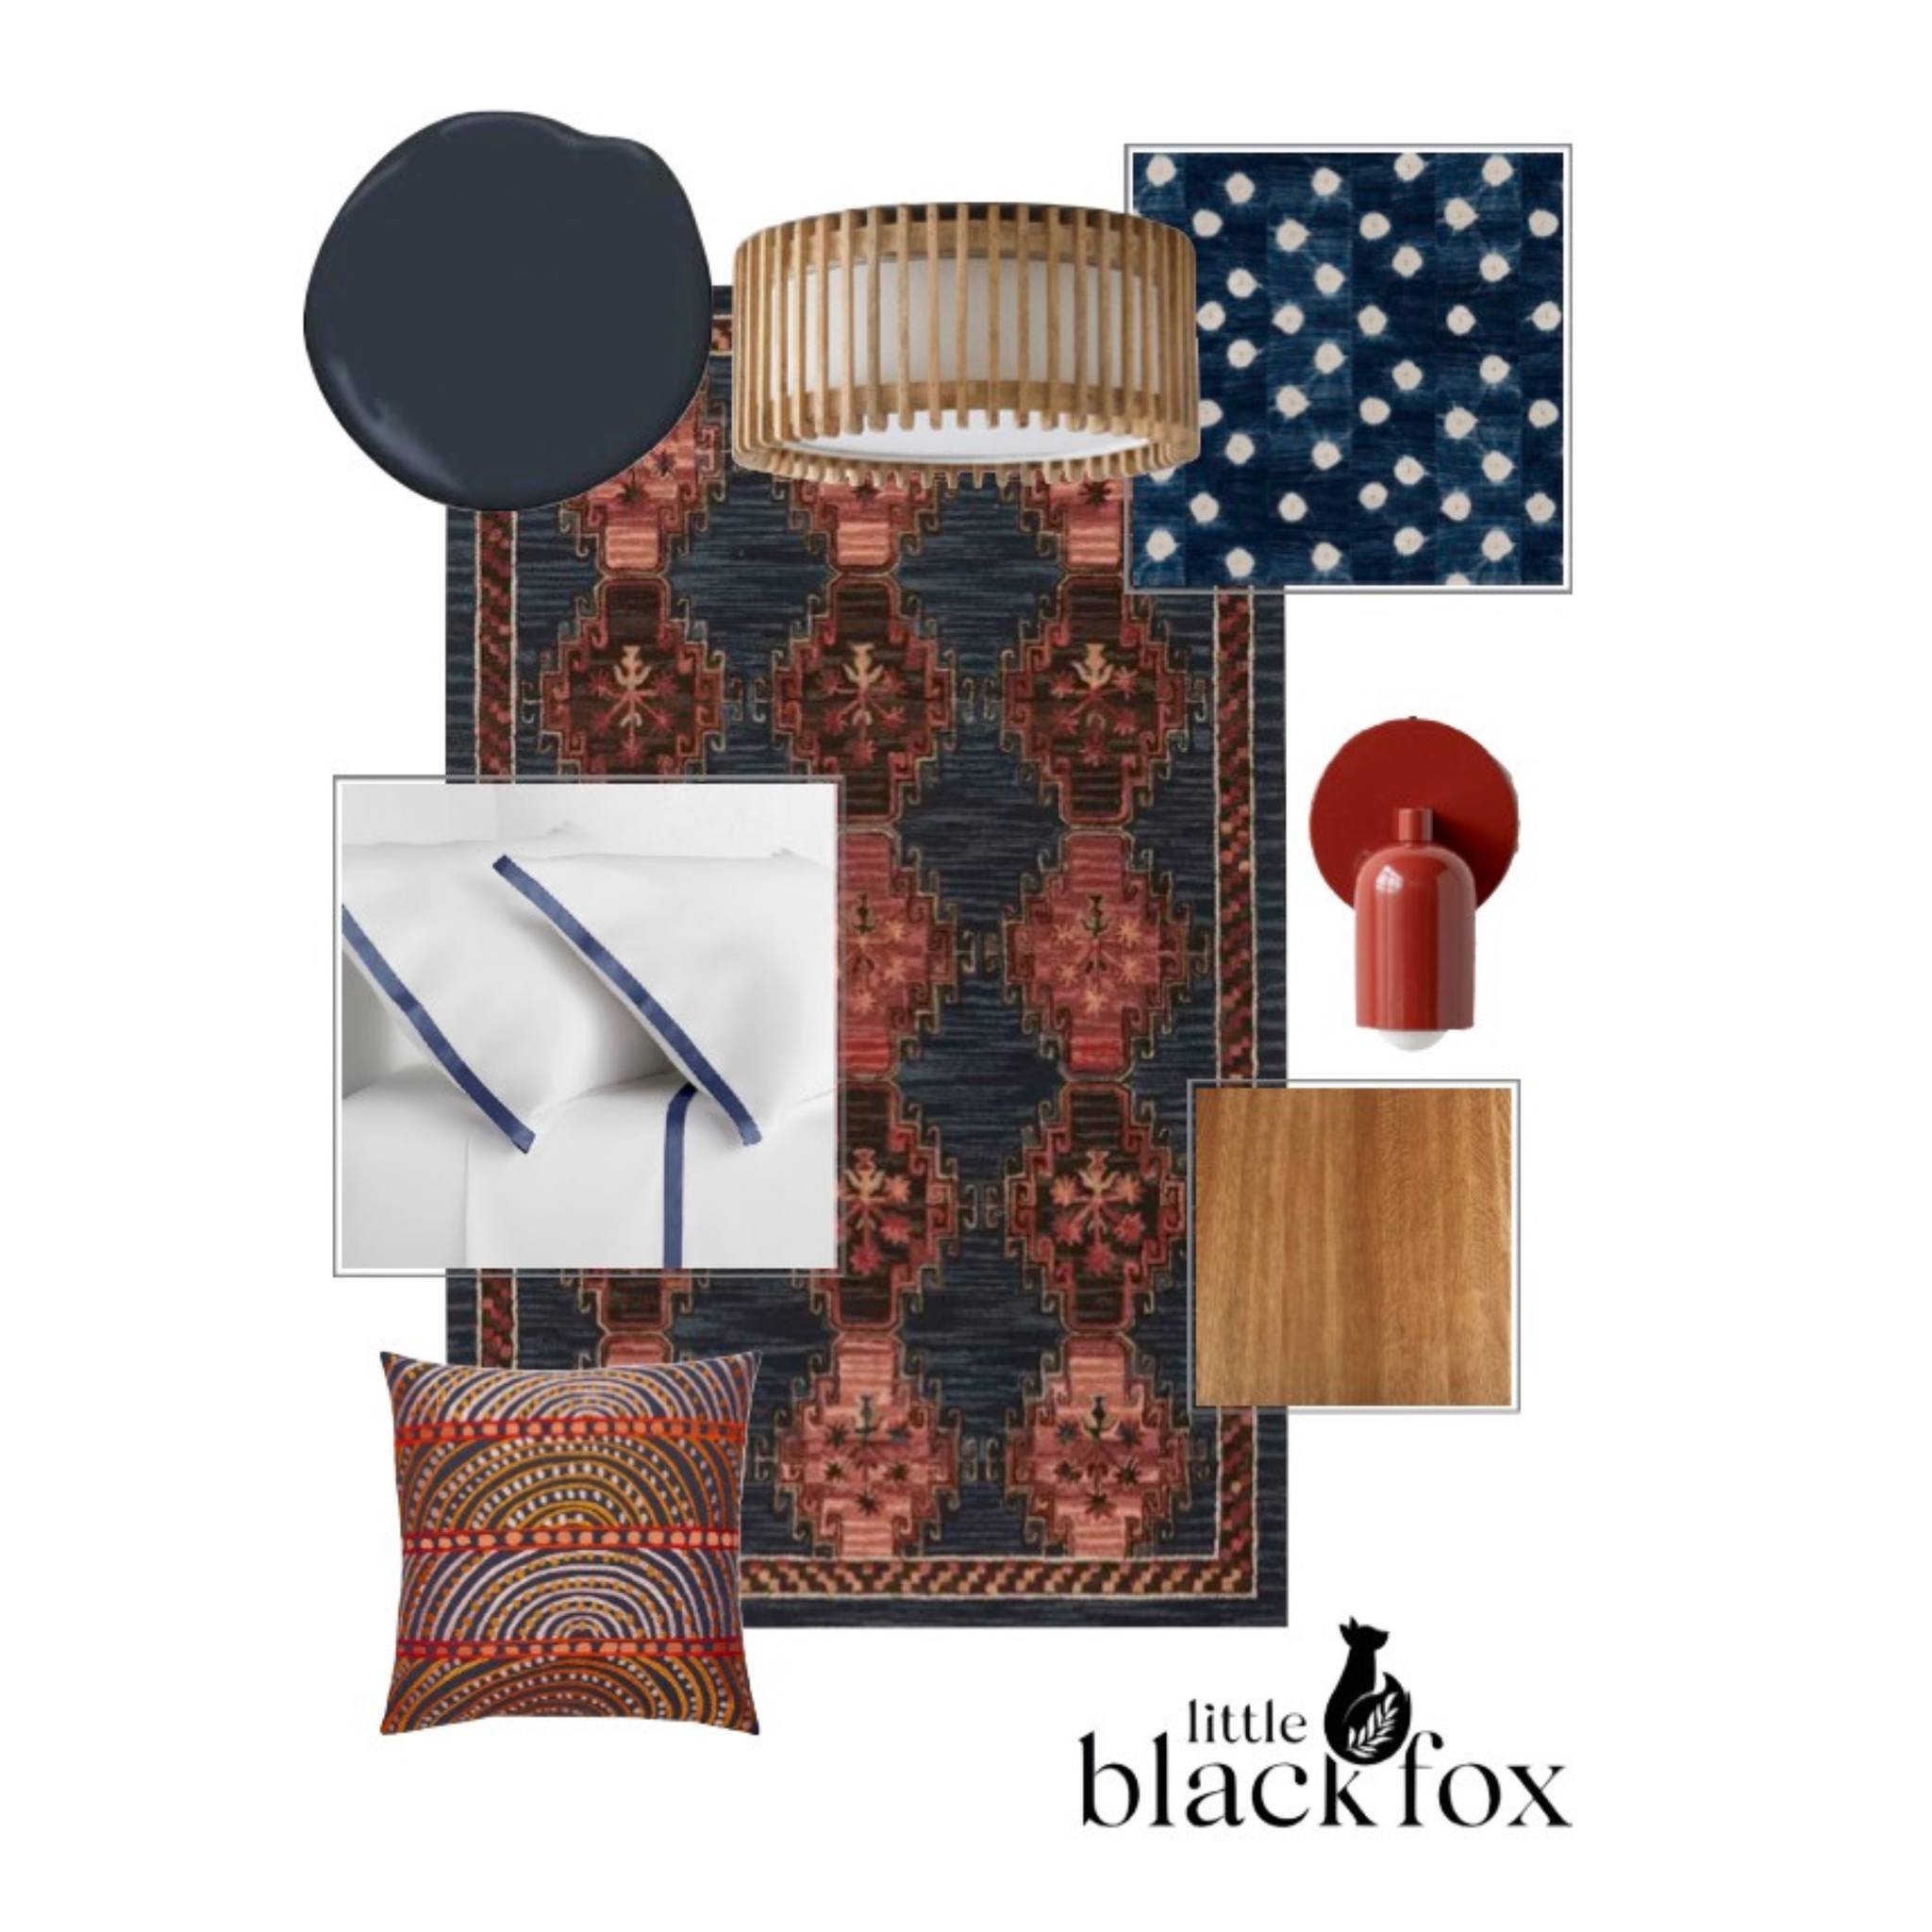 Benjamin Moore paint, rich pops of color, and varietal textures are all the makings of a Little Black Fox Design. I'm loving that pop of red against the Polo Blue. Brilliant patterns characterize the persona of this space. Visually mesmerizing, vibra